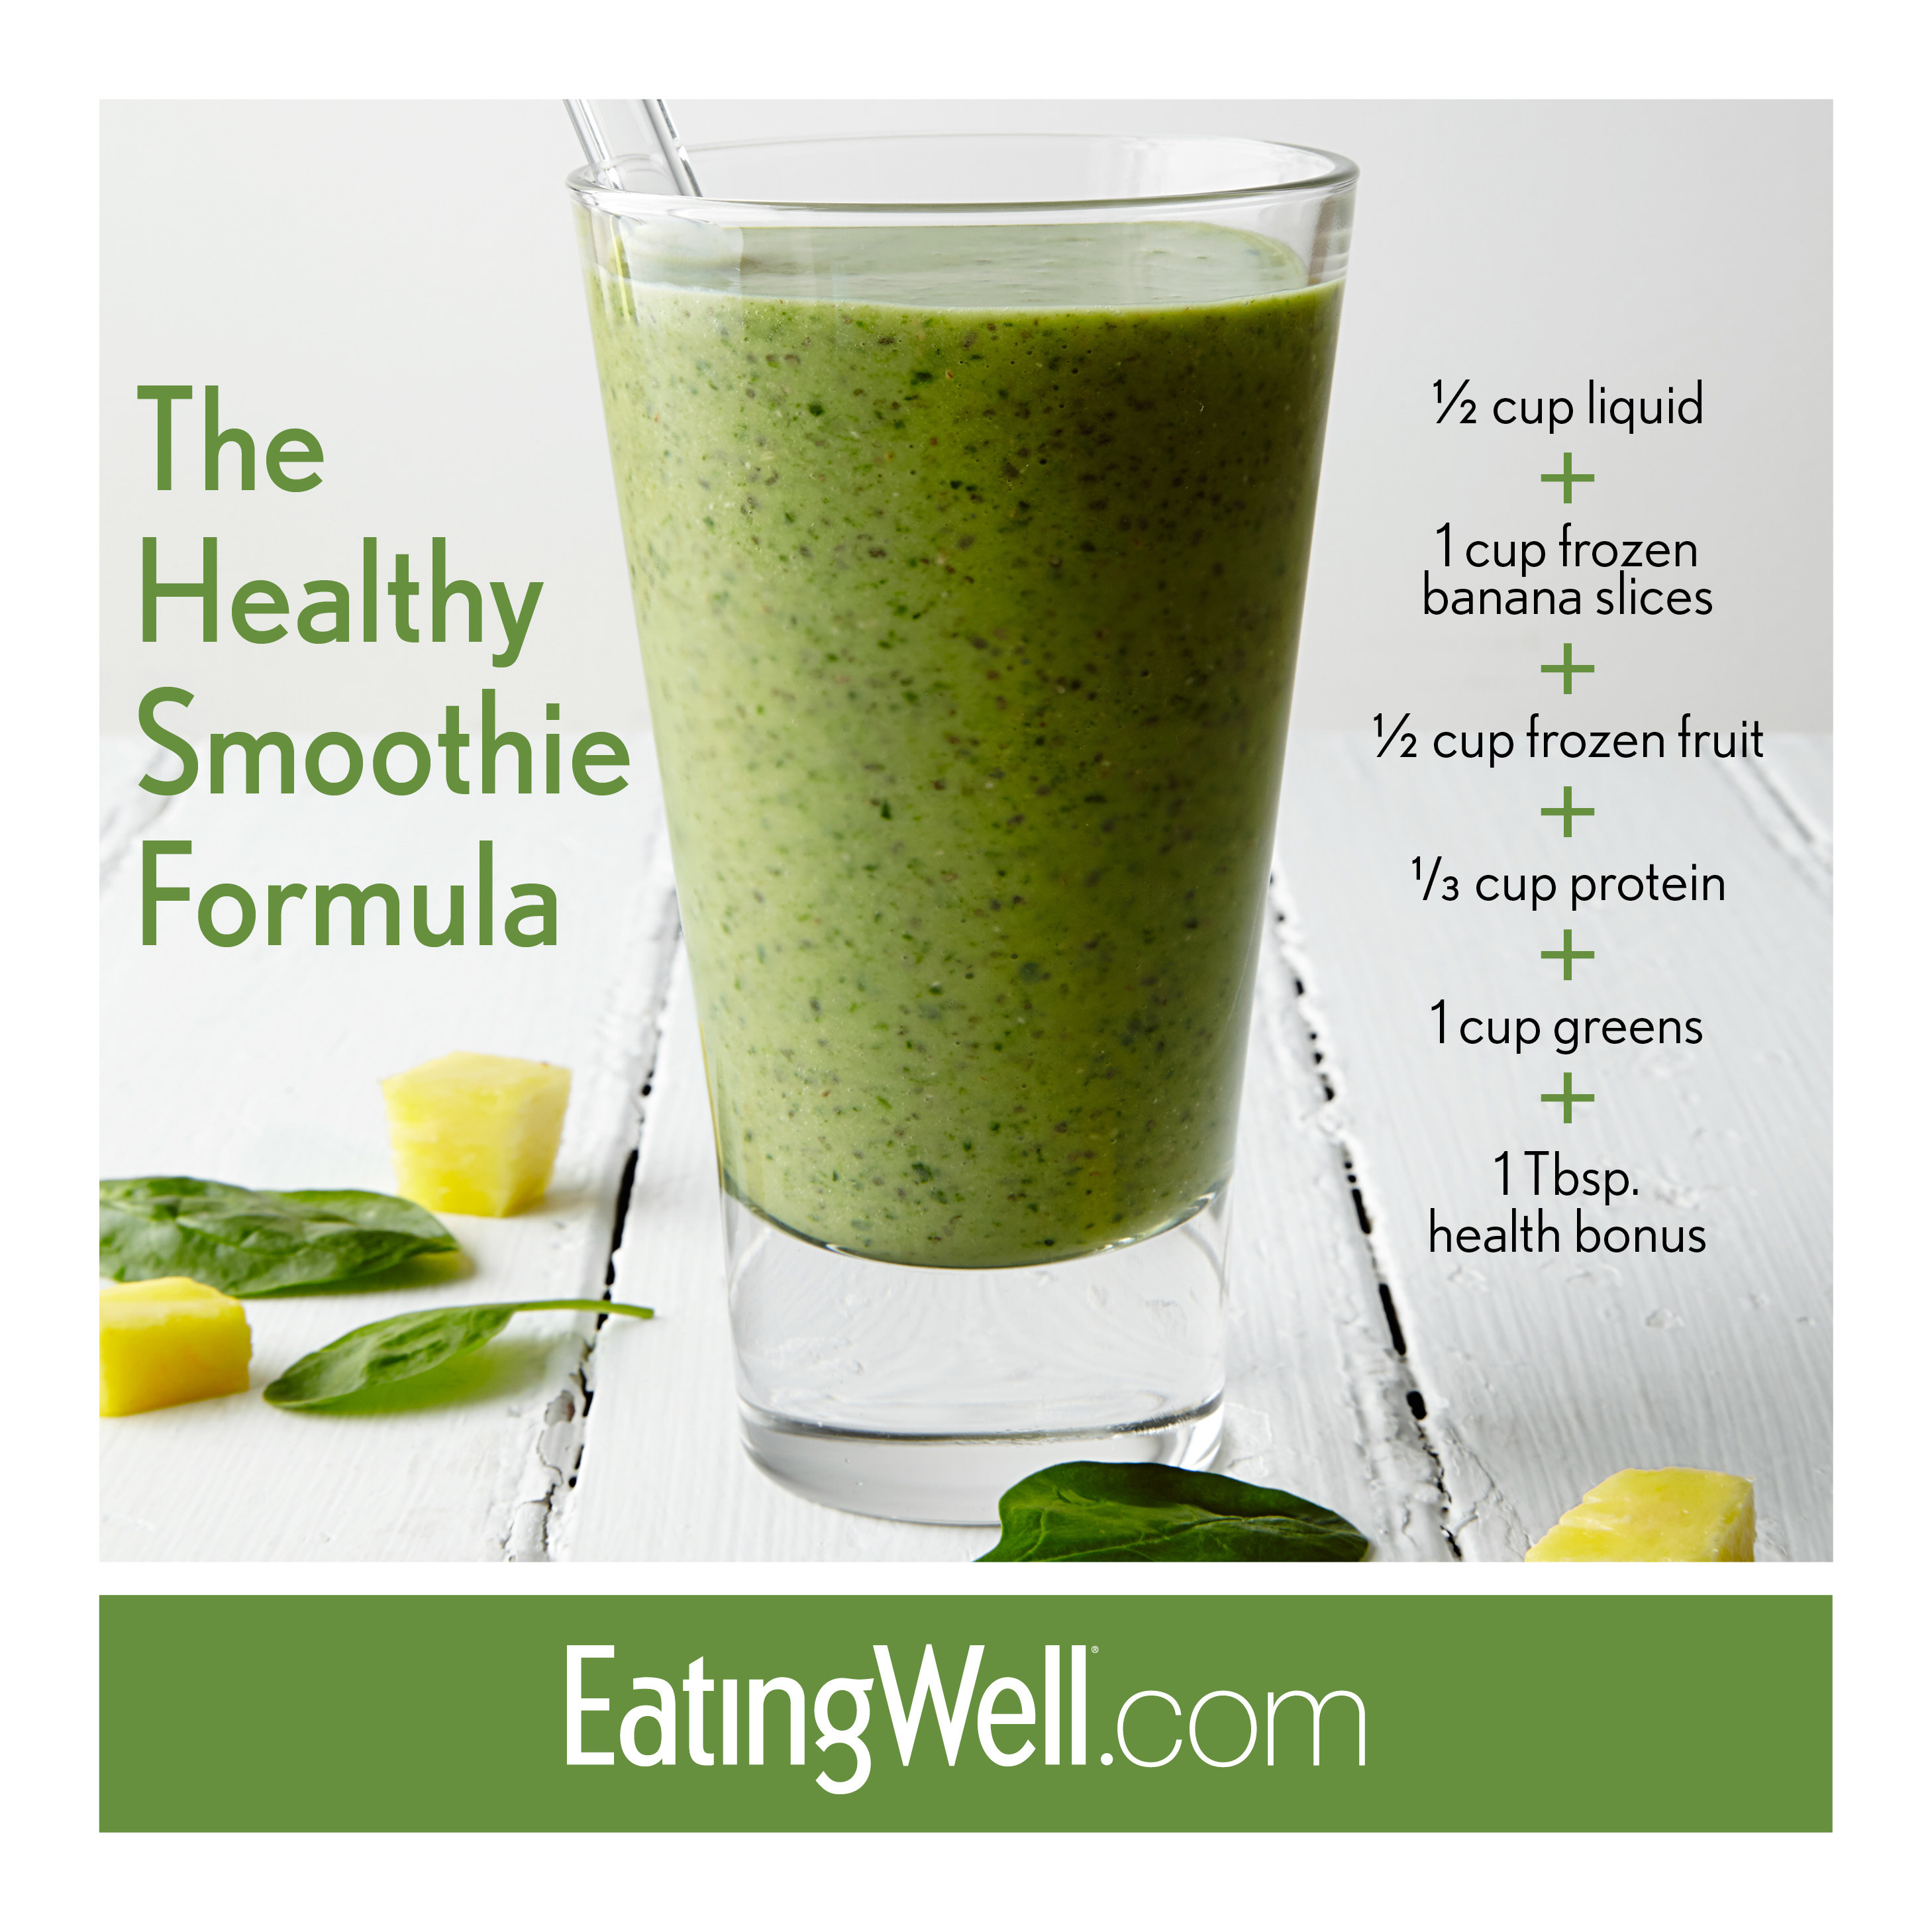 Healthy Smoothie Recipes
 The Ultimate Green Smoothie Recipe EatingWell